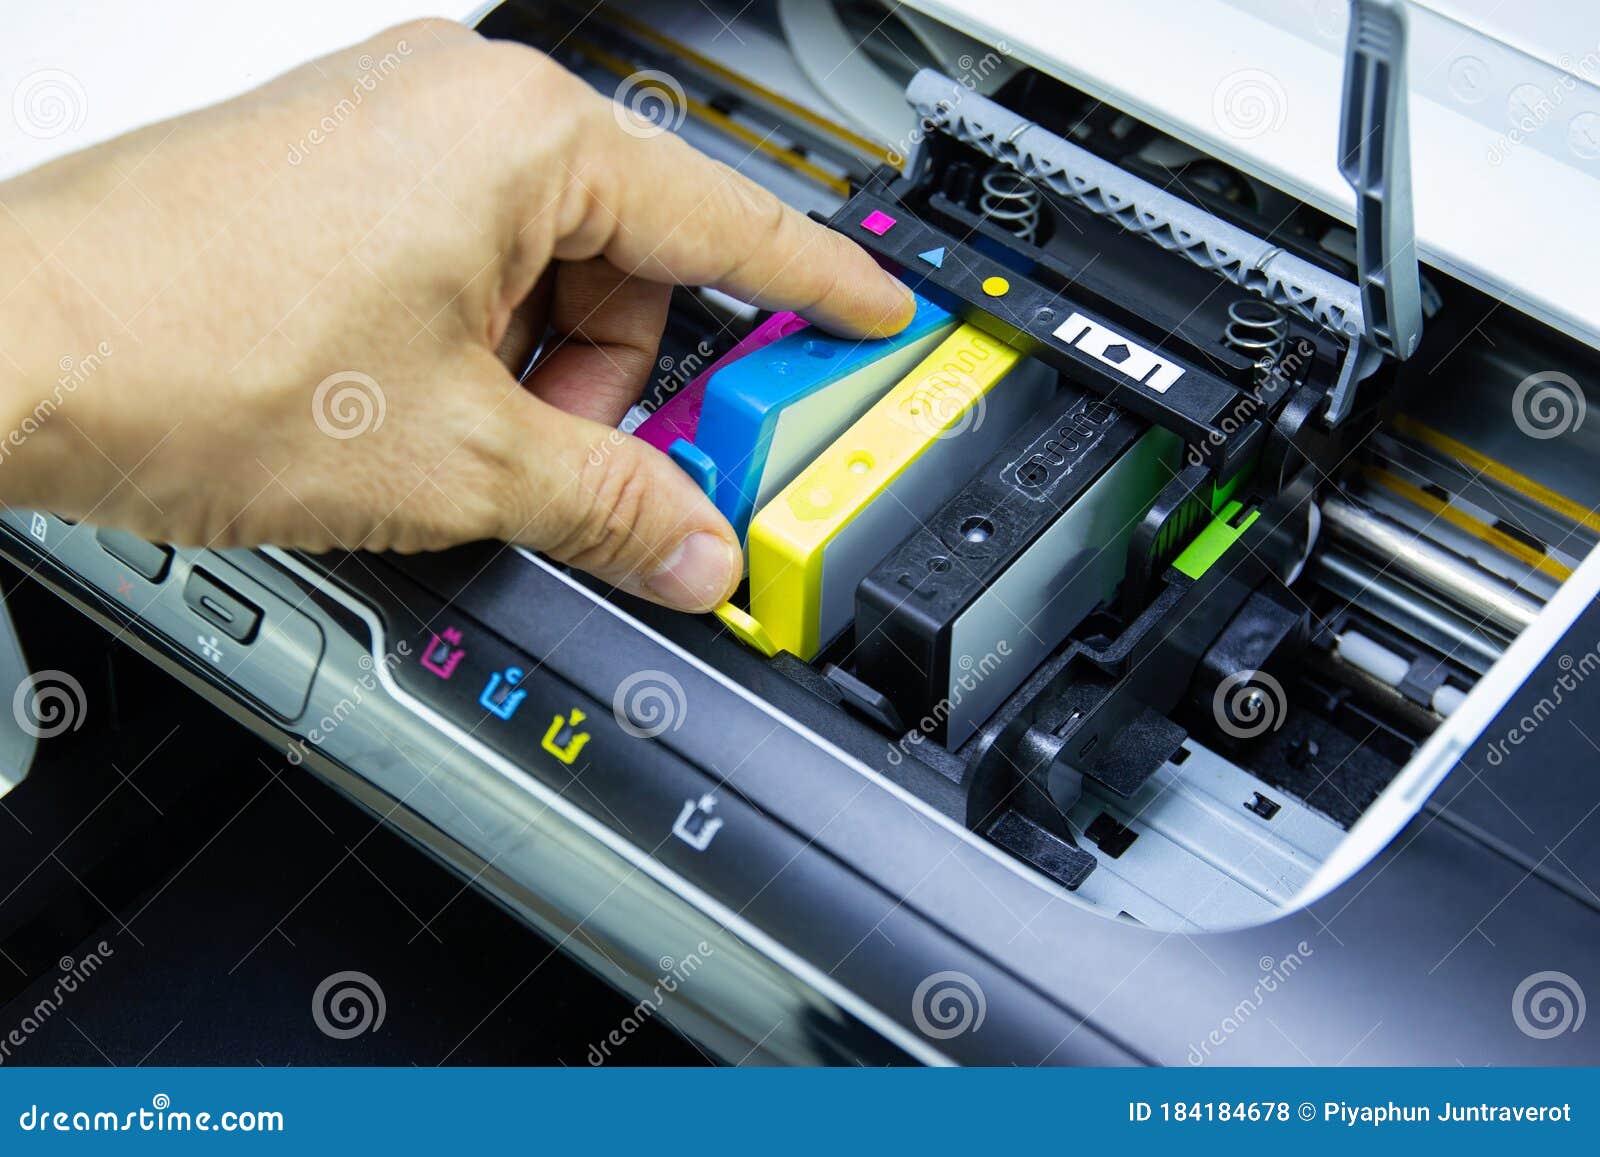 Technicians are Install Setup the Ink Cartridge of a Inkjet Printer the Device Office Automate Photo - process, print: 184184678